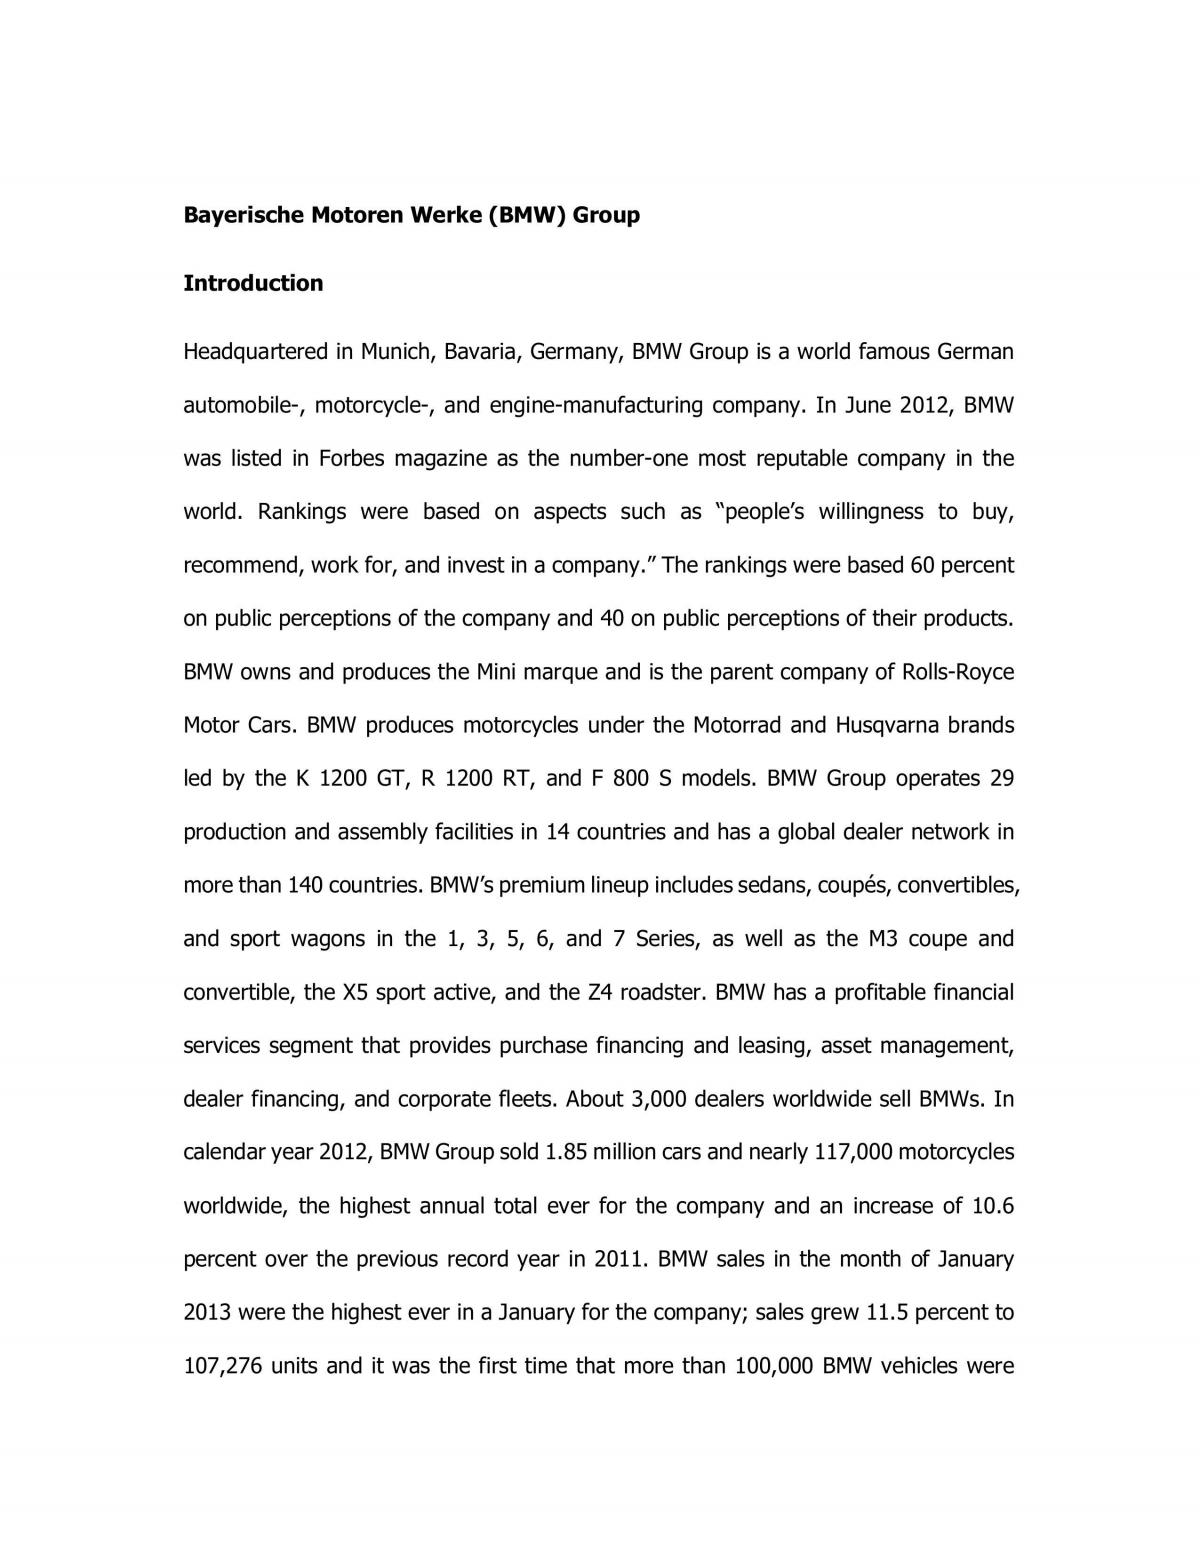 Analysis of BMW Group - Page 1